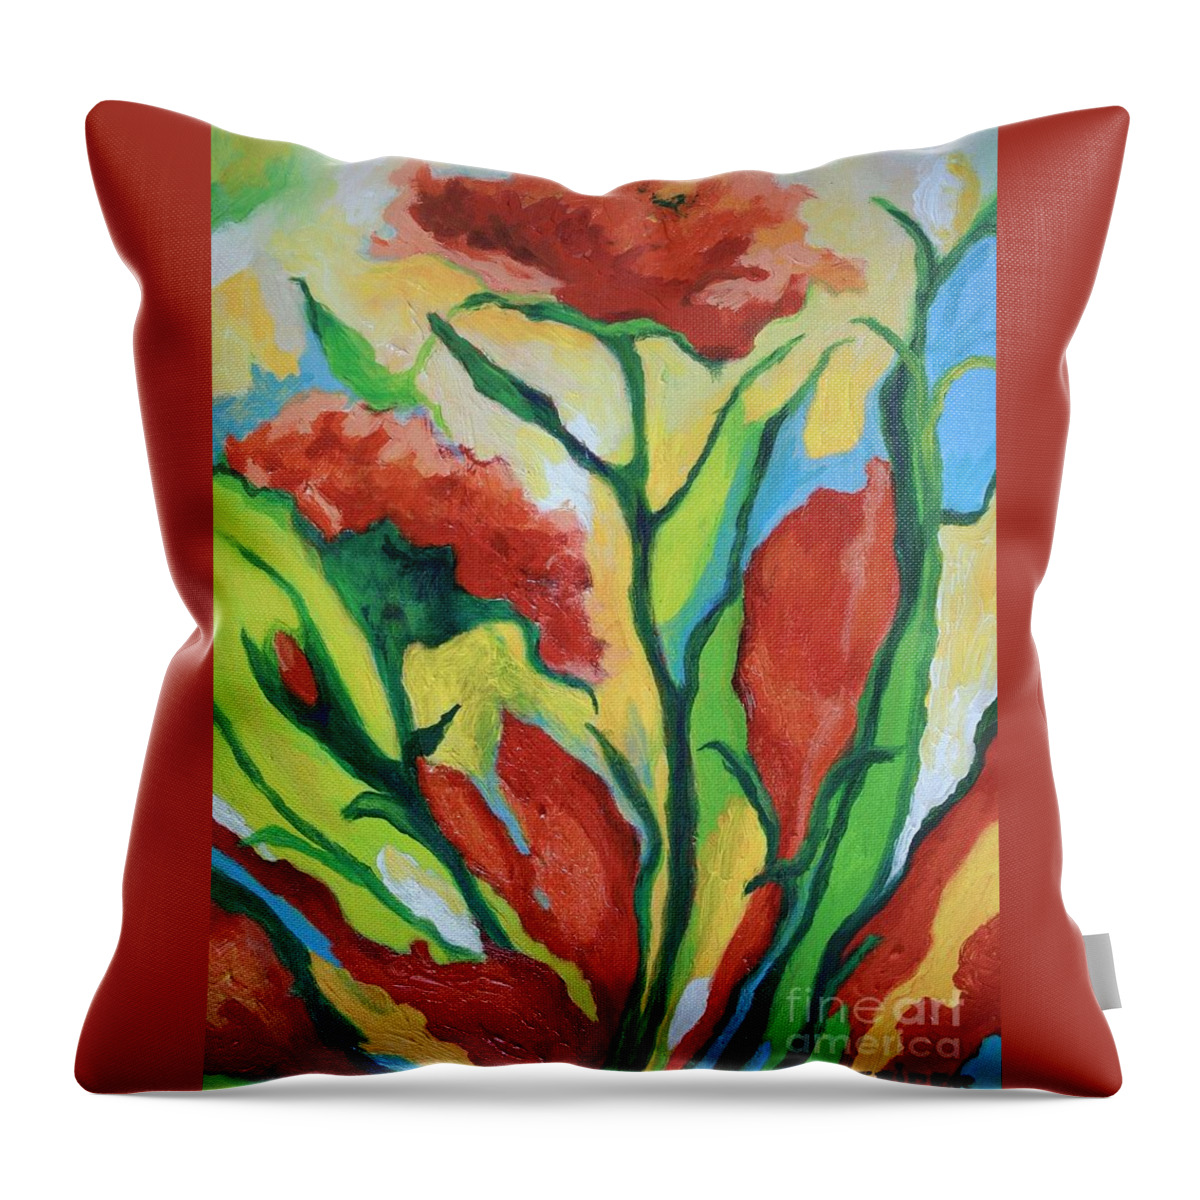 Flowers Throw Pillow featuring the painting Red Delight by Alison Caltrider